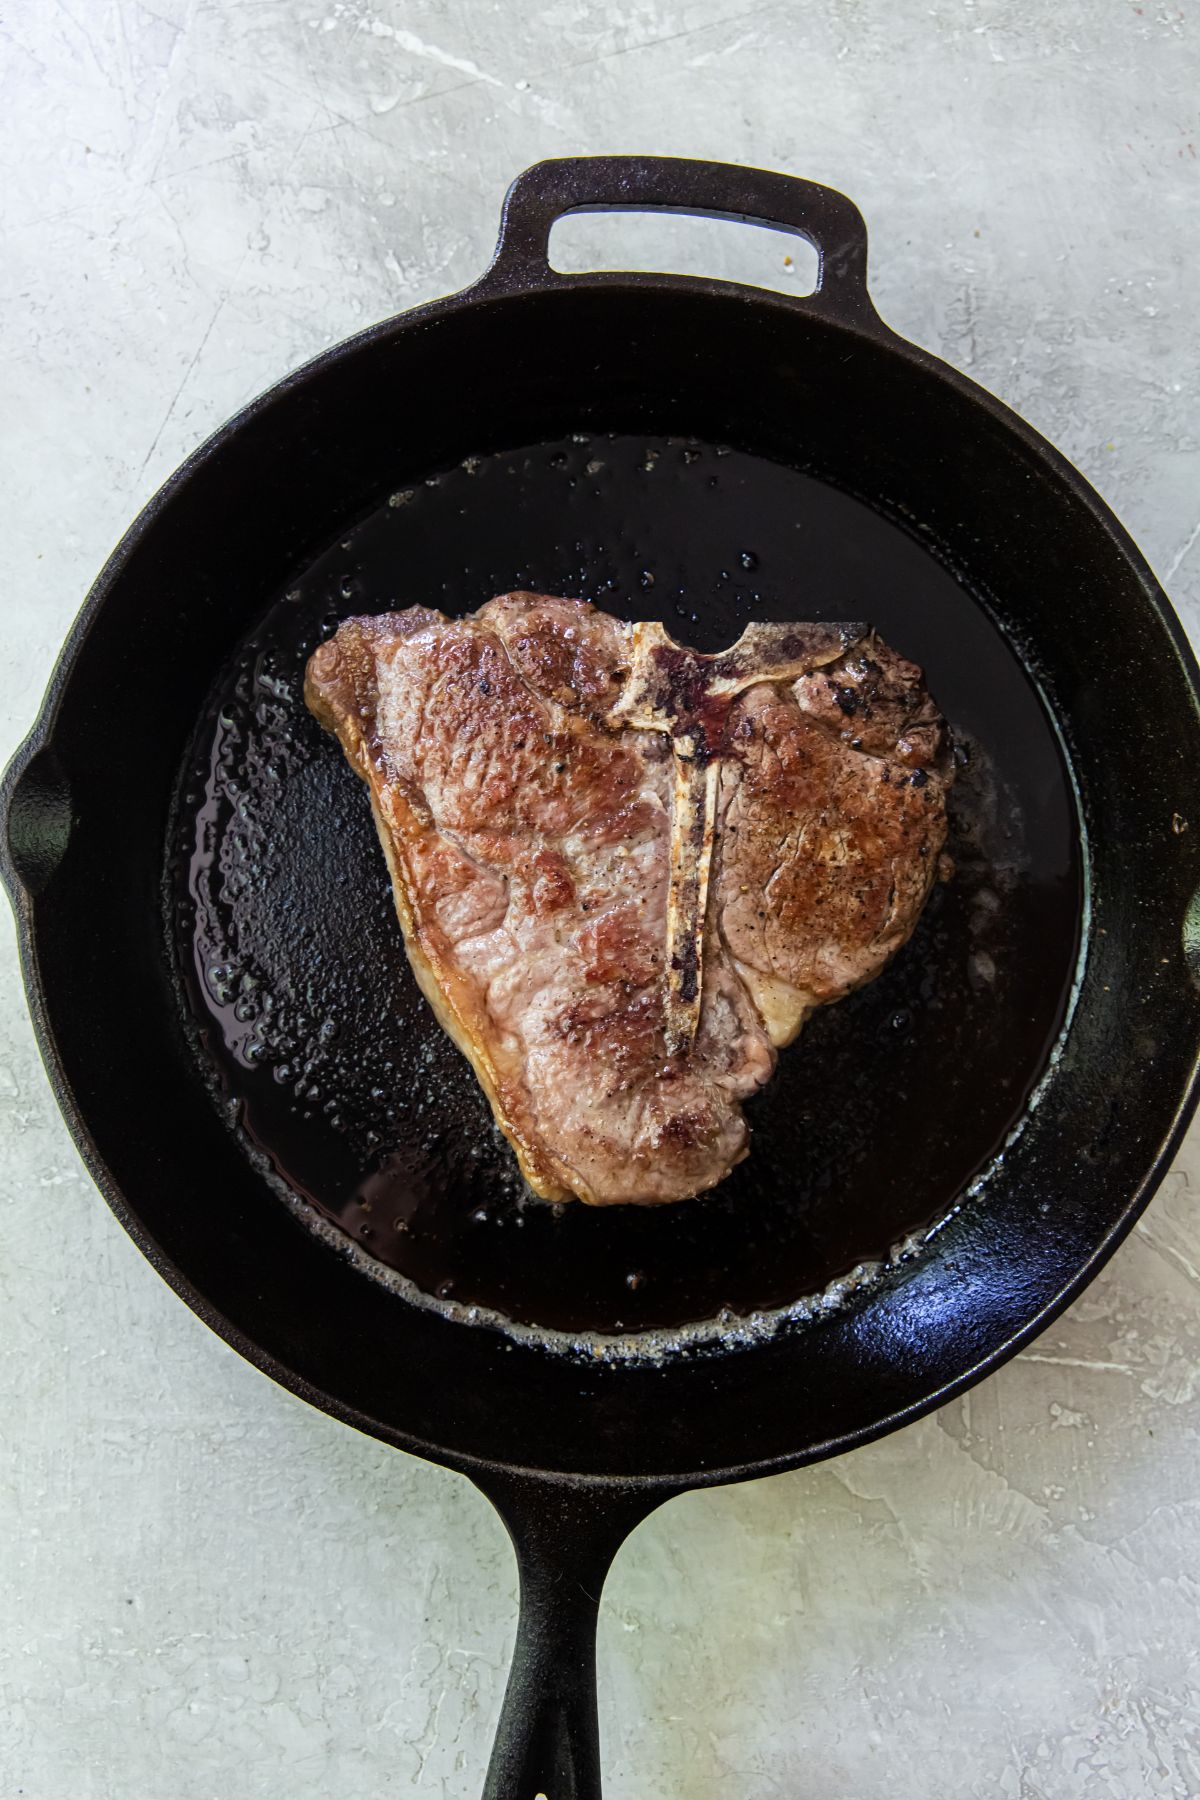 A piece of meat is being cooked in a cast iron skillet.